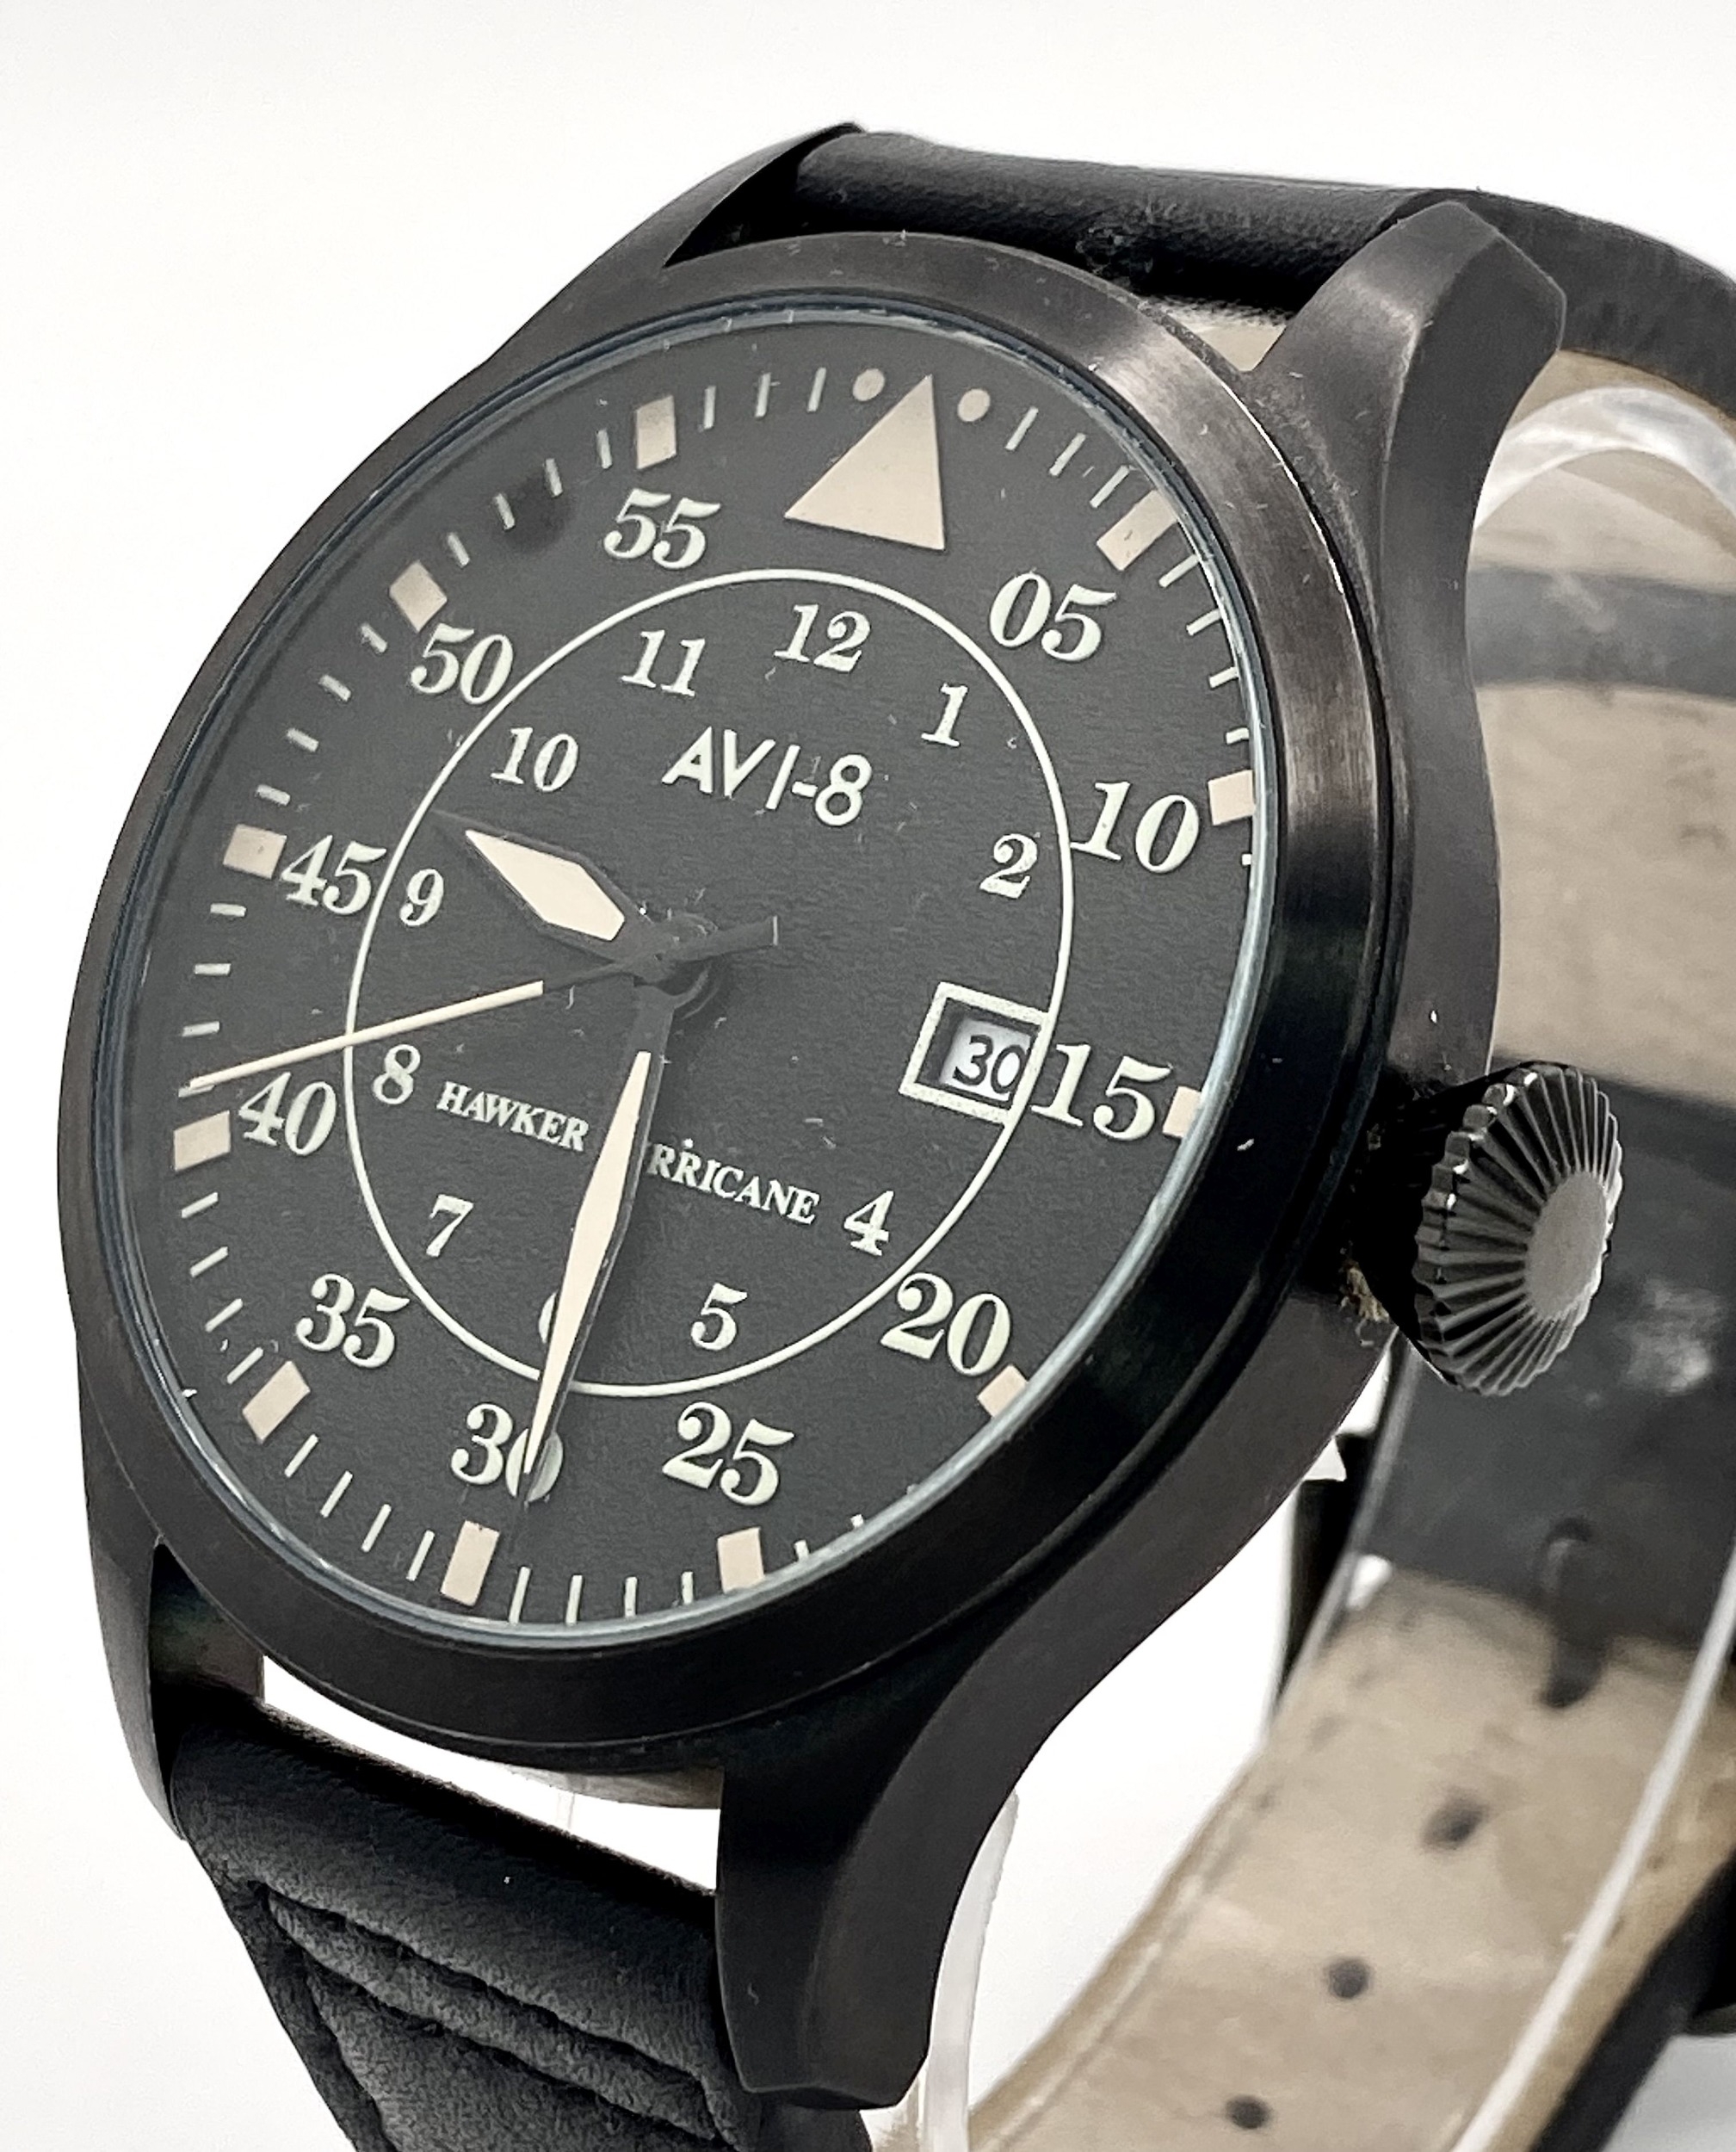 A Men’s Limited Run ‘Hawker Hurricane’ Pilots Date Watch by AVI8. 50mm Including Crown. Full Working - Image 3 of 9